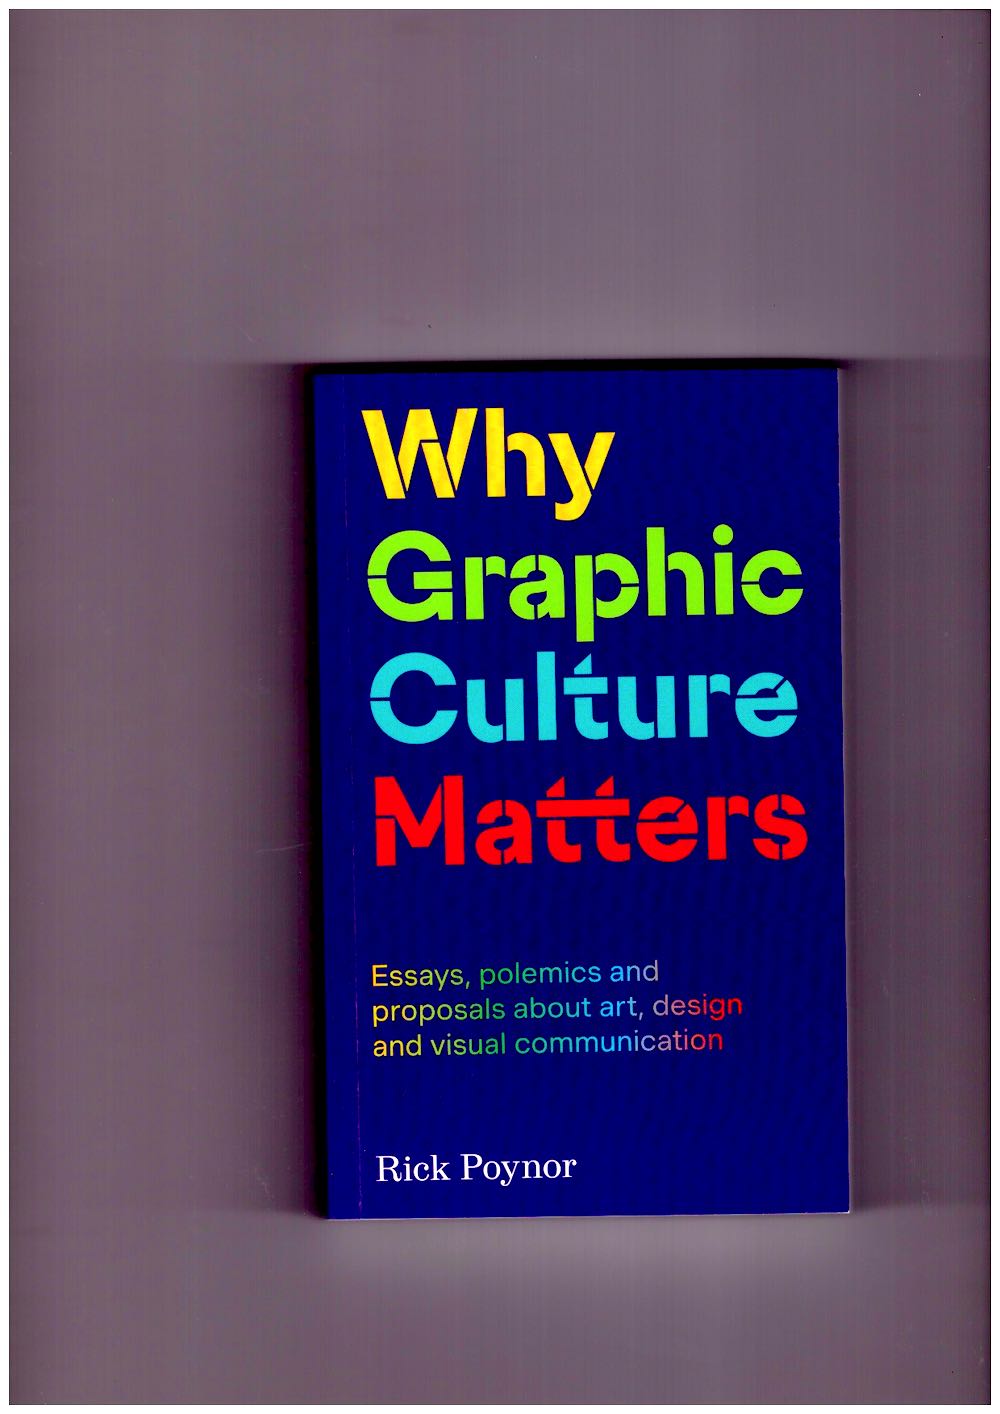 POYNOR, Rick - Why Graphic Culture Matters